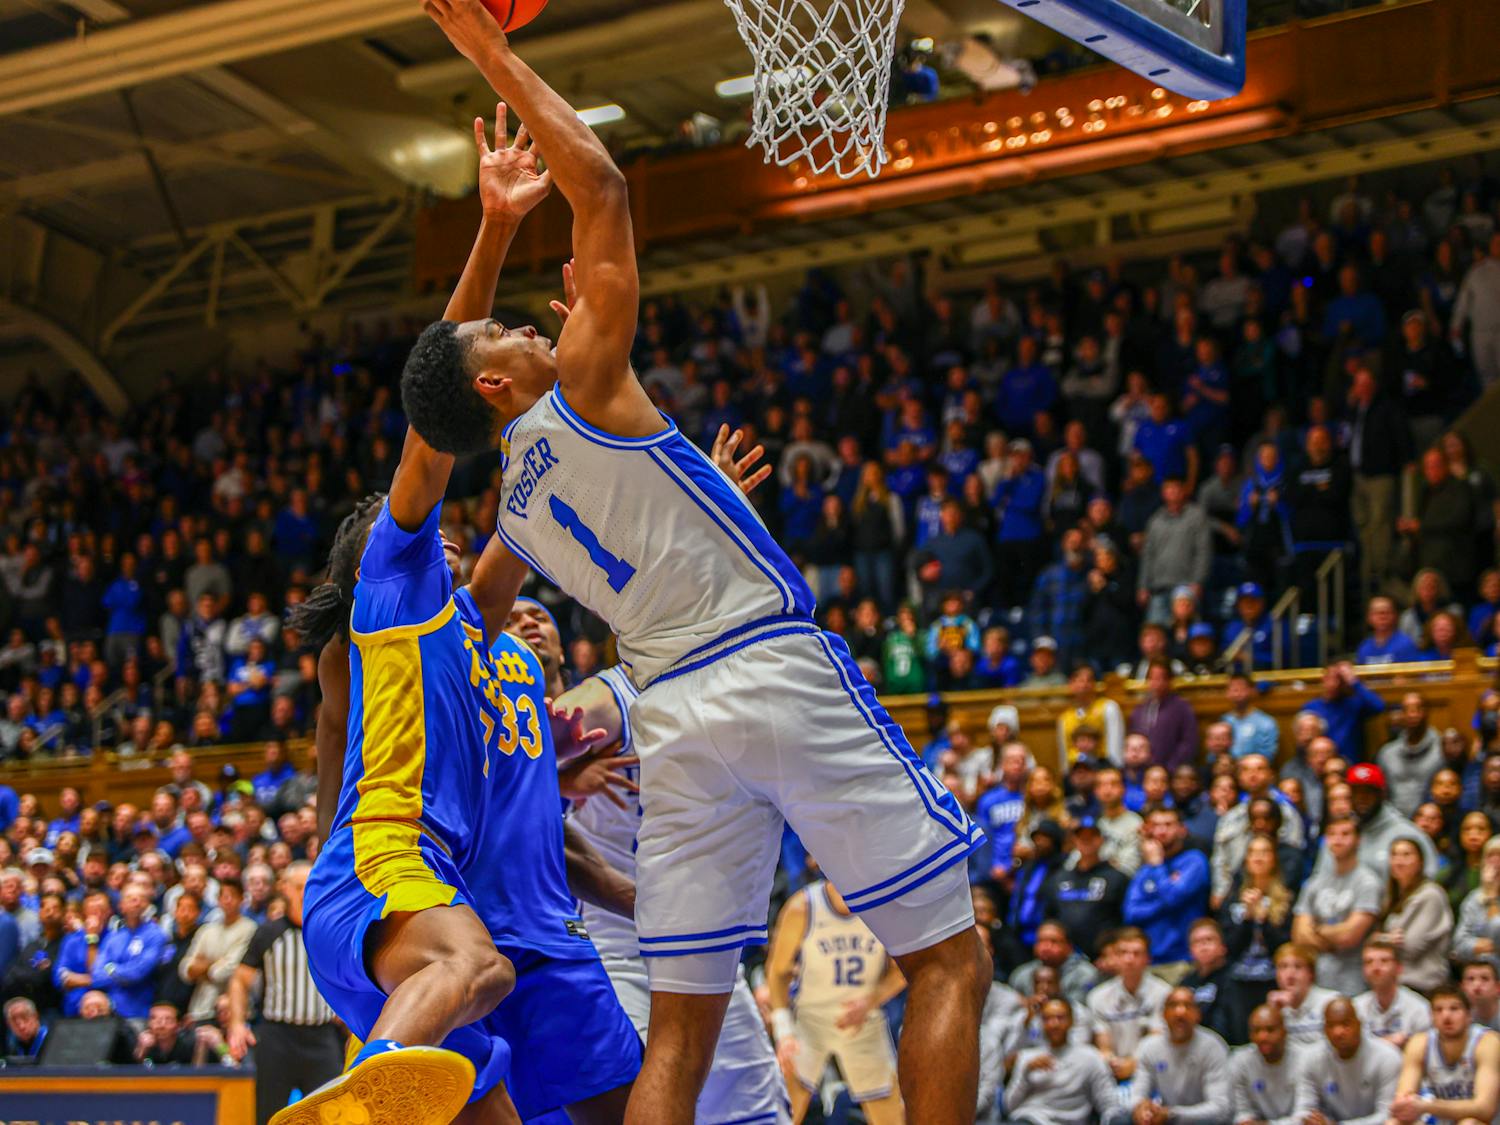 Freshman guard Caleb Foster had 16 points and five assists against Pittsburgh Jan. 20.